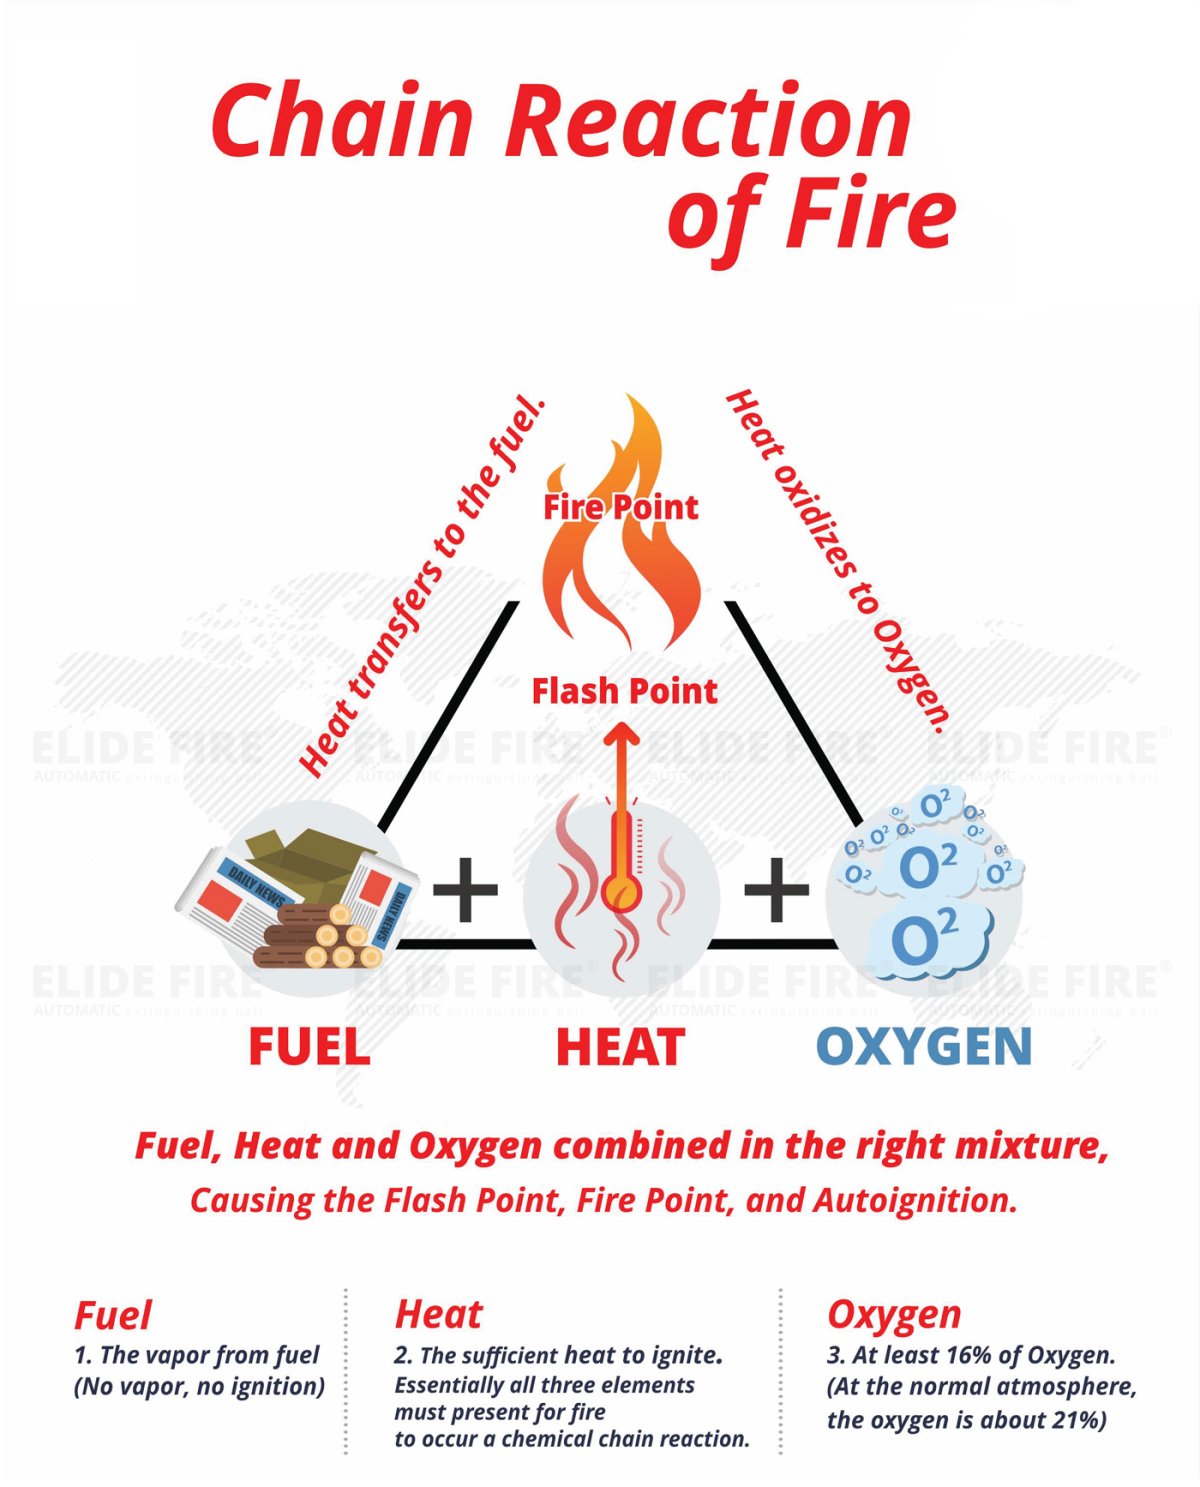 THE NATURE OF FIRE & CHAIN REACTION OF FIRE - elidefire